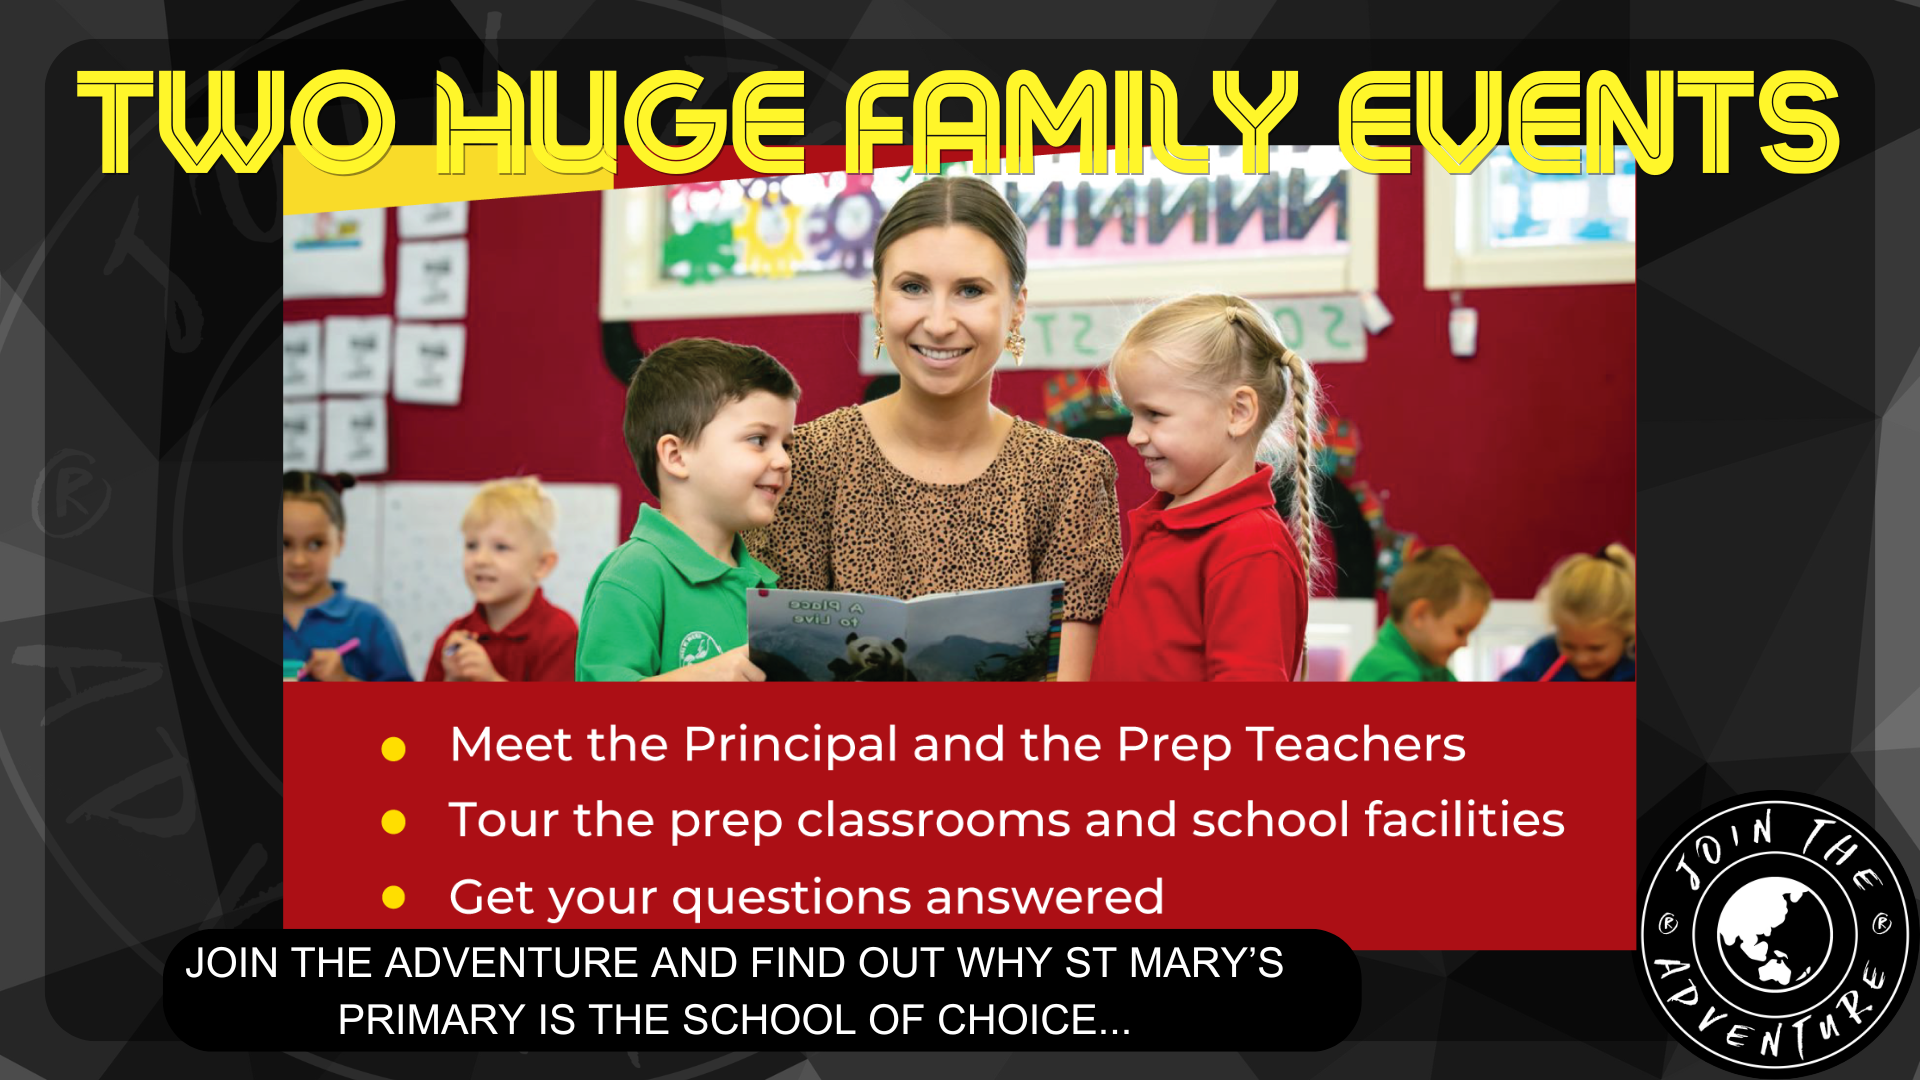 Excitement Builds for St Mary’s Primary School in Laidley with May Events